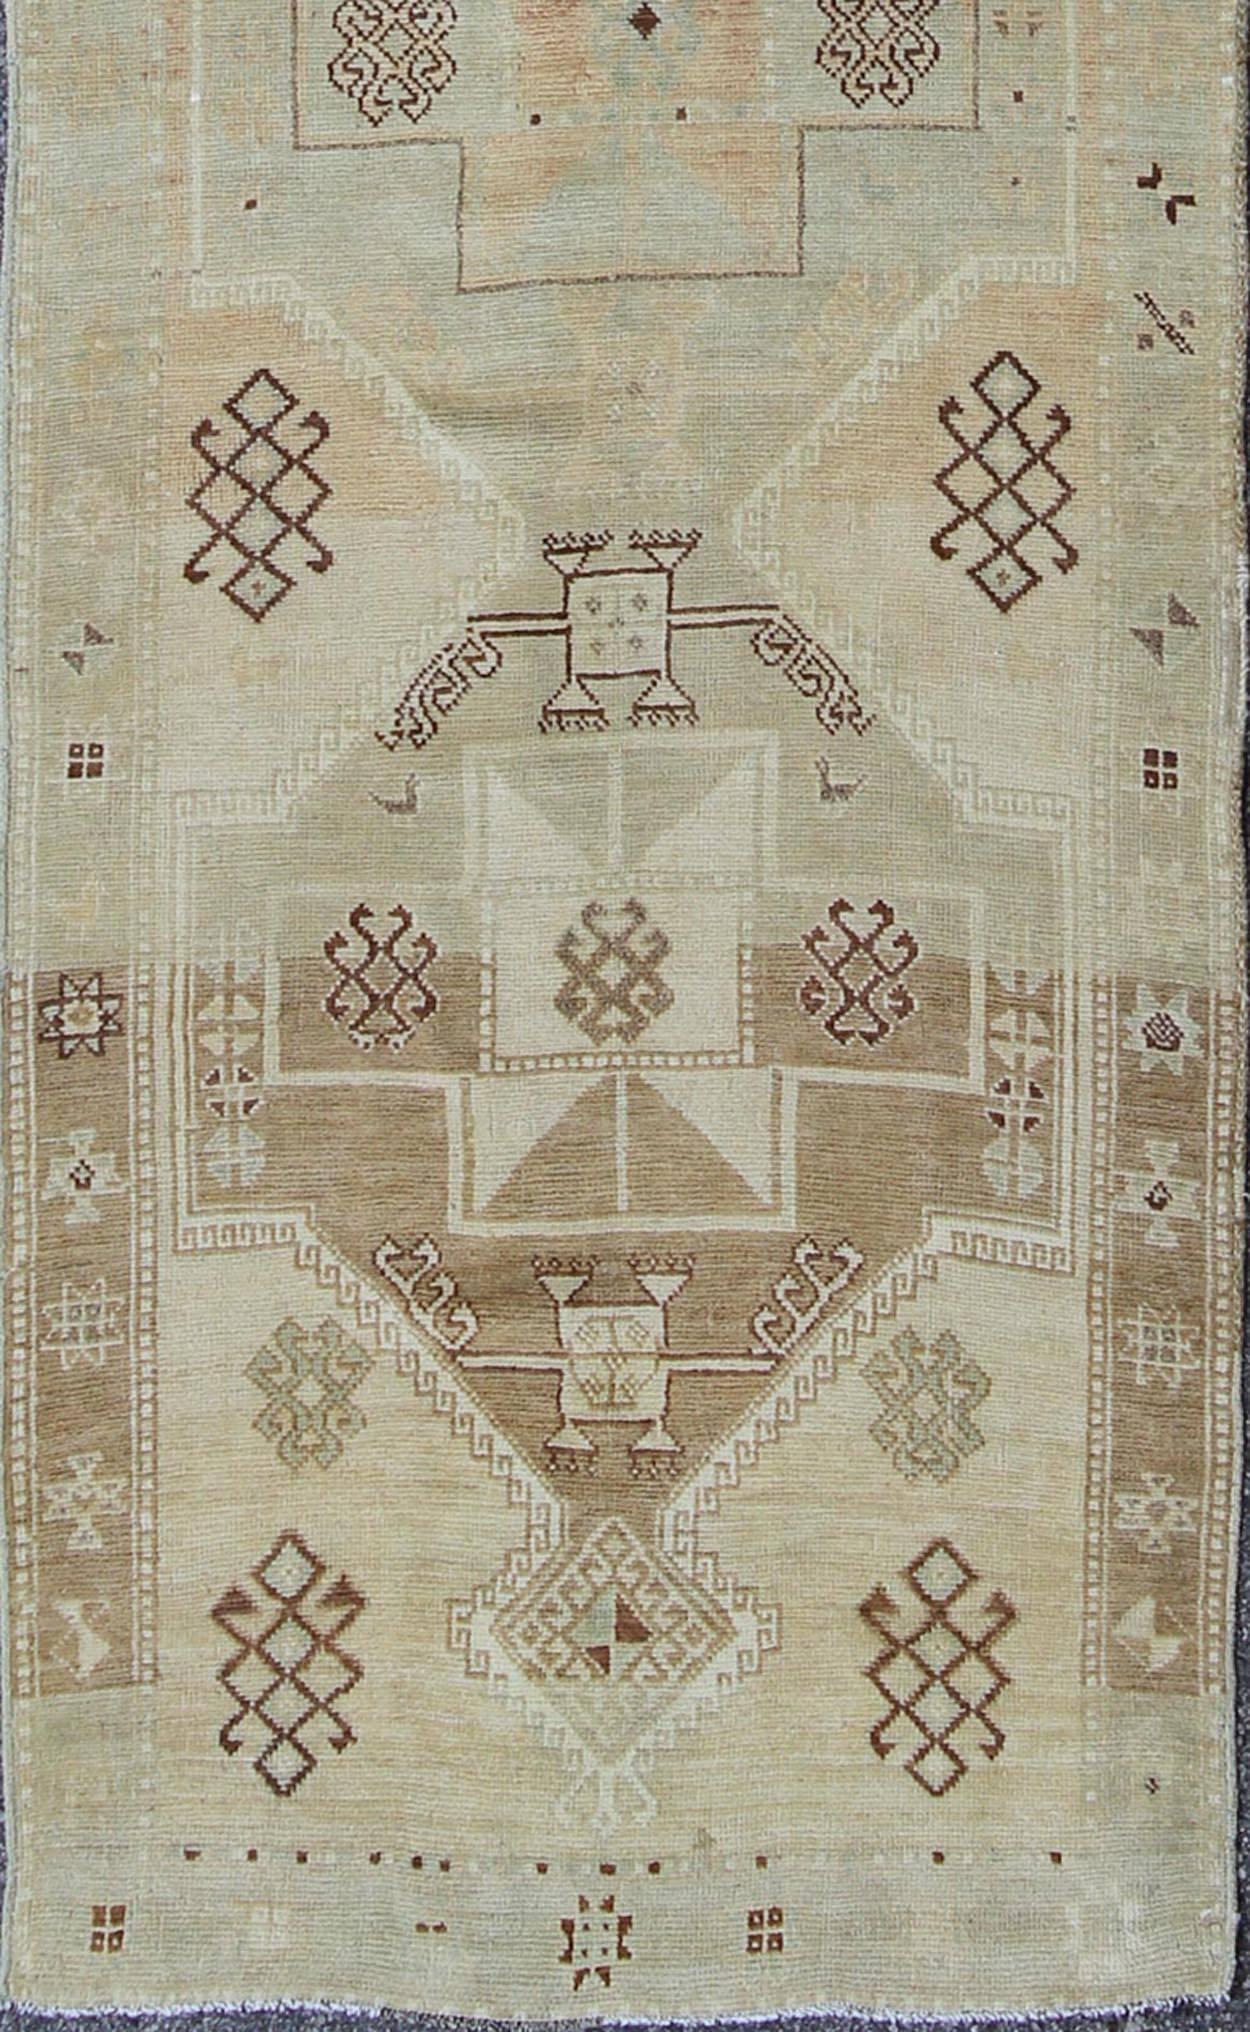 Midcentury vintage Turkish Oushak runner with geometric tribal medallions, rug en-4261, country of origin / type: Turkey / Oushak, circa mid-20th century

This vintage Turkish Oushak gallery rug (circa mid-20th century) features a unique blend of